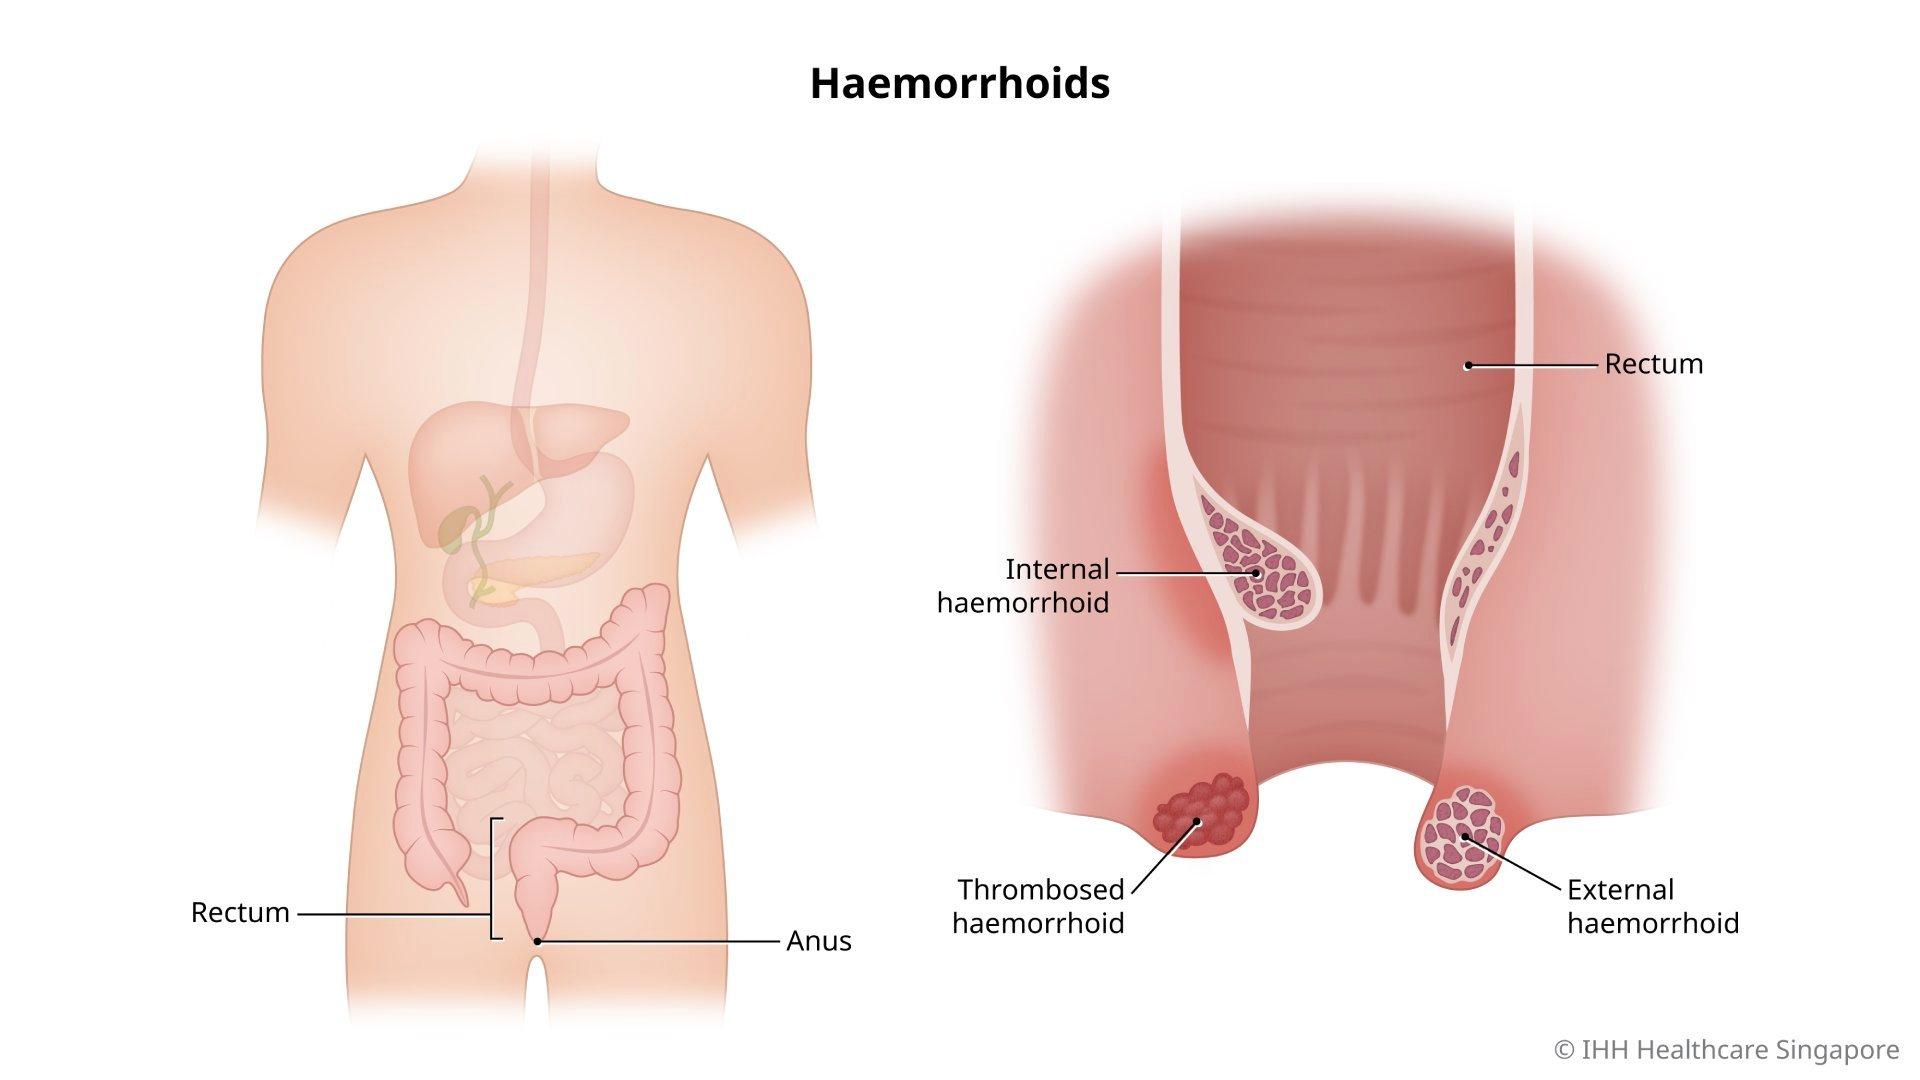 Illustration of the types of haemorrhoids, which include internal, thrombosed, and external.